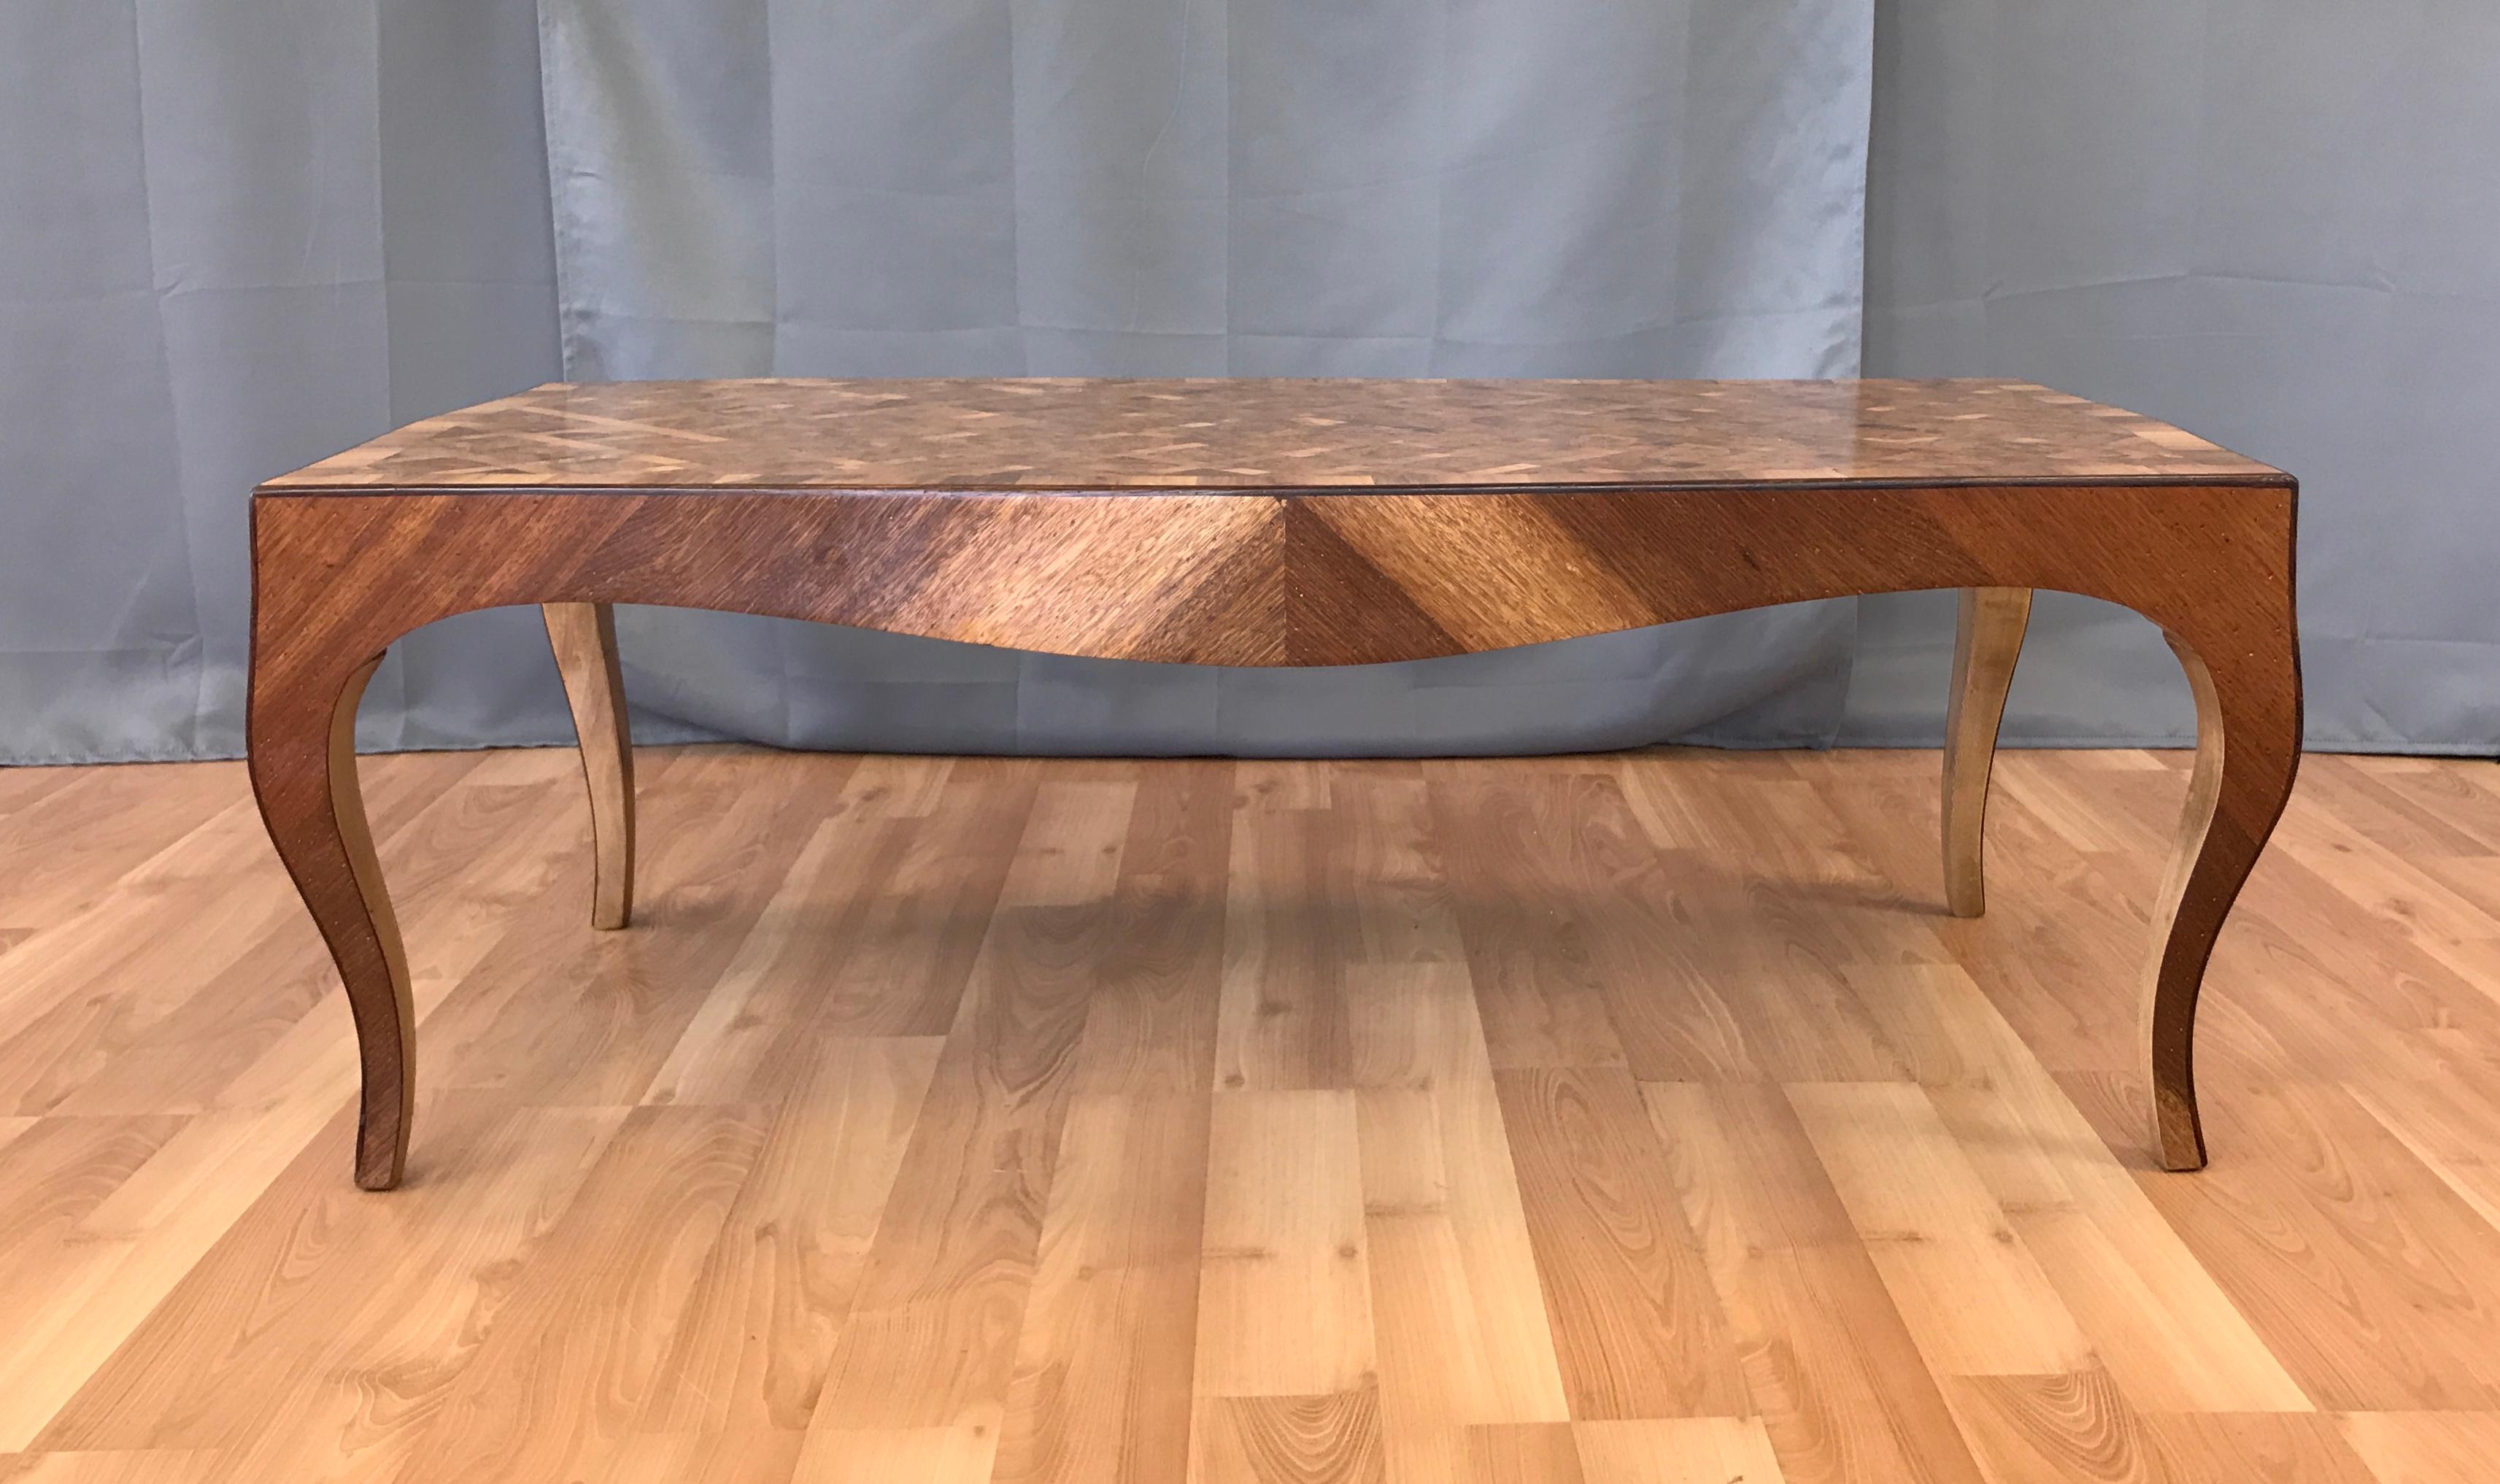 Offered here is a vintage 1940s Italian marquetry coffee table.

this example features intricately grained elmwood burl squares bordered with fruit wood (pecan?) on a diagonal pattern. The Pecan wood boarder and skirt finish in graceful cabriole